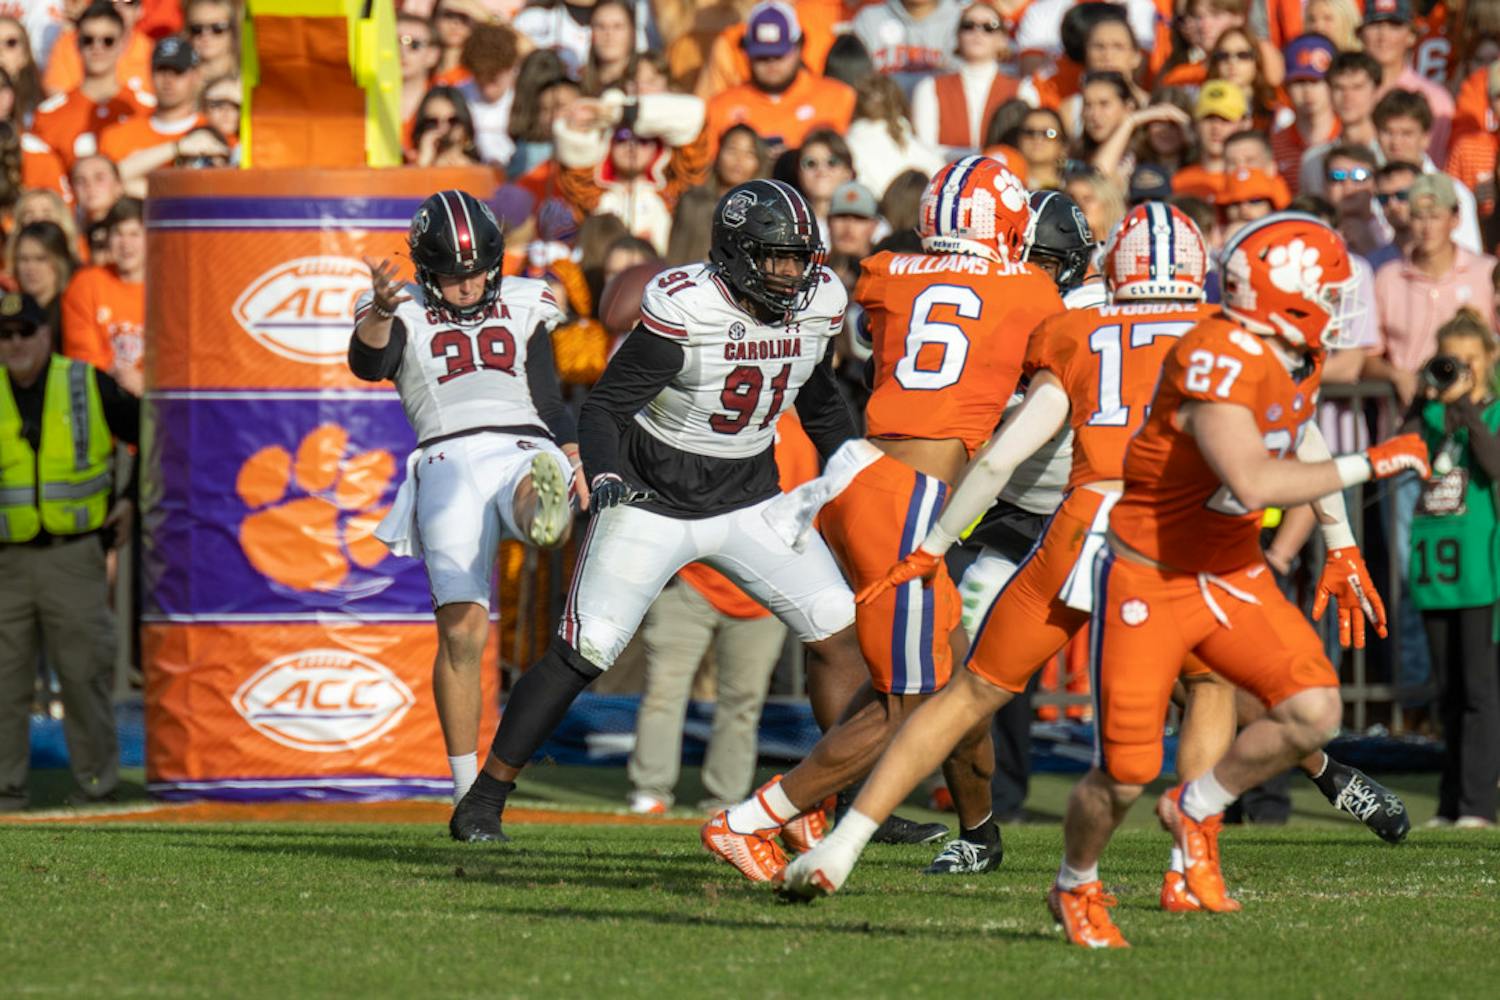 Junior punter Kai Kroeger punts away the ball after a stalled drive on Nov. 26, 2022, at Memorial Stadium. Kroeger punted for a total of 376 yards agains Clemson.